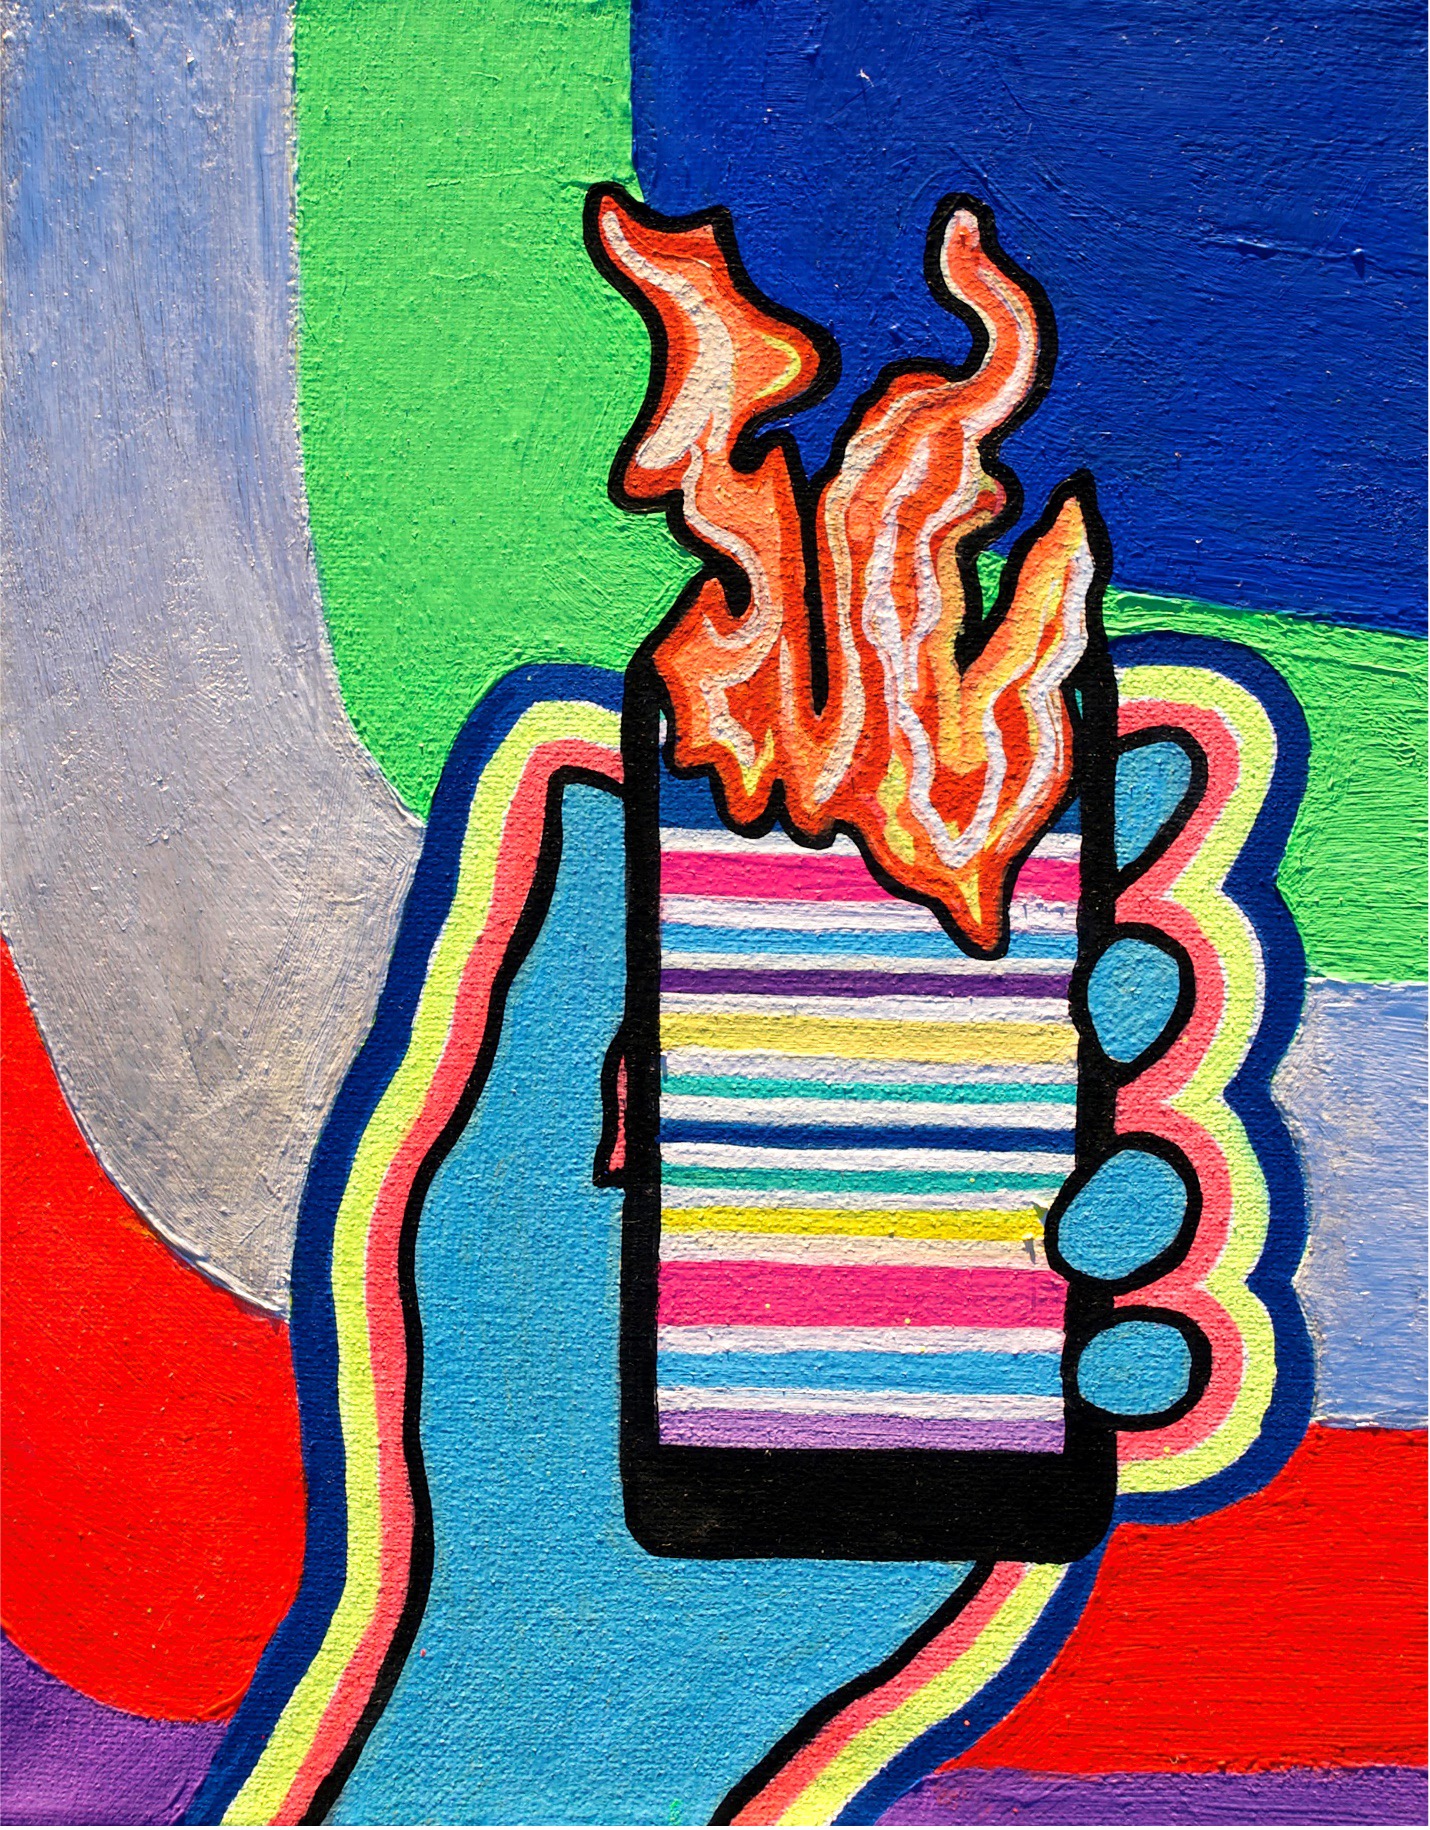 Acrylic on Canvas painting showing abstract hand holding a cell phone that is ablaze in the foreground against a bright pop colored background